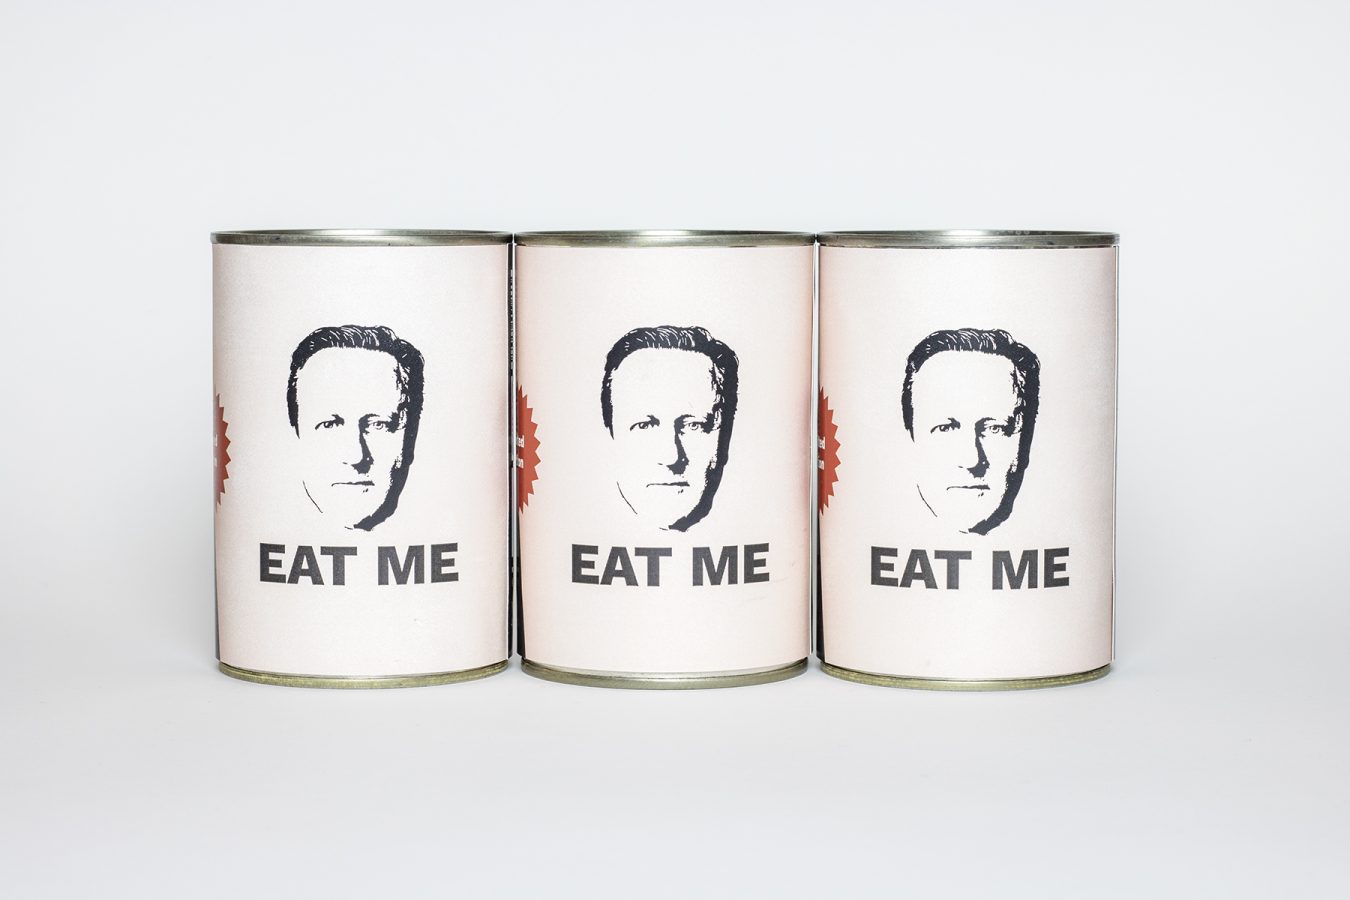 Eat Me – David Cameron in a Can